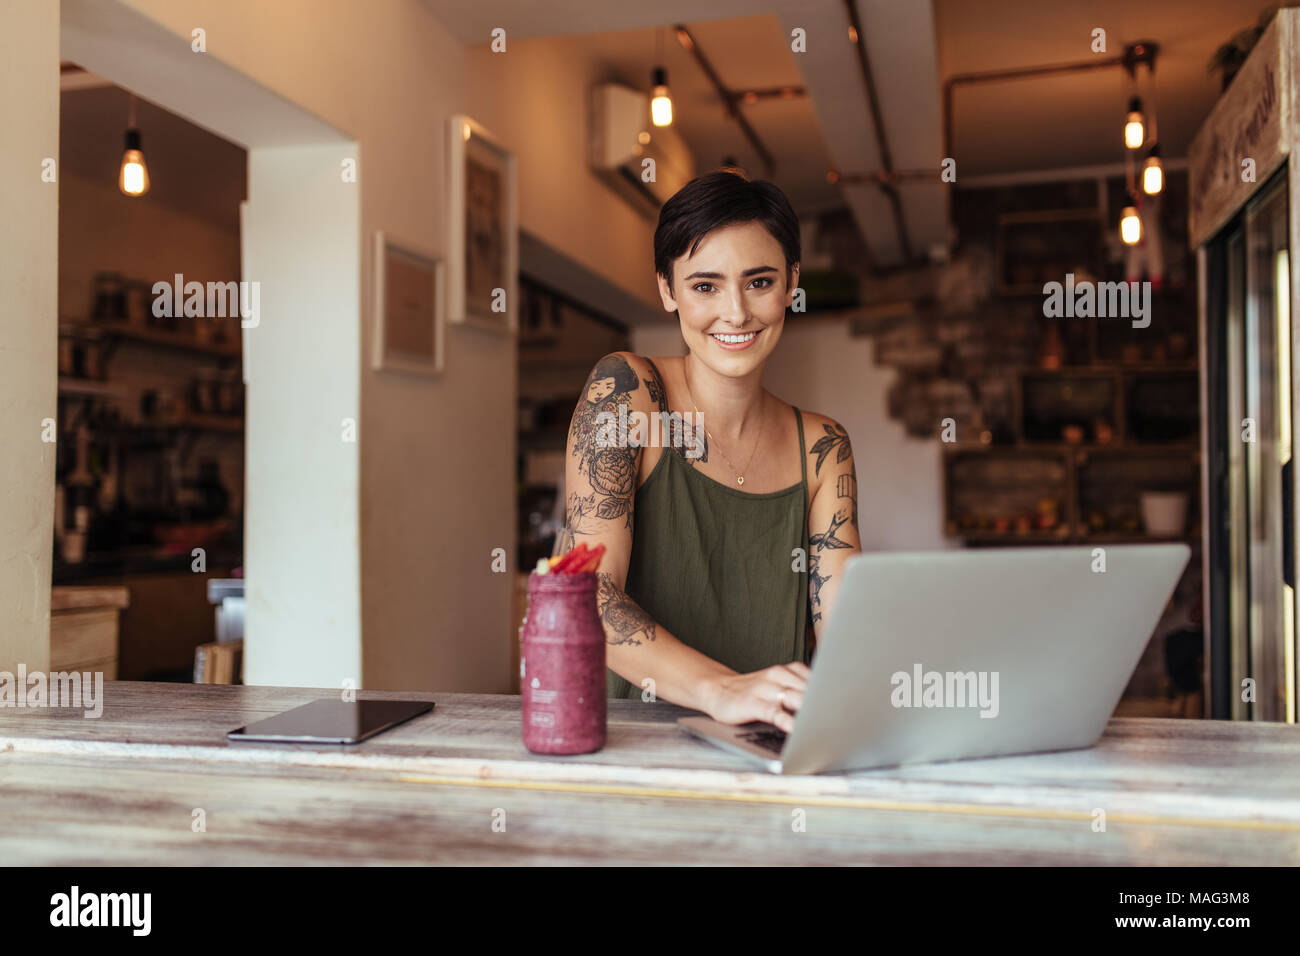 Woman entrepreneur working on laptop computer at home with a smoothie on the table. Woman enjoying a glass of smoothie while working at home. Stock Photo